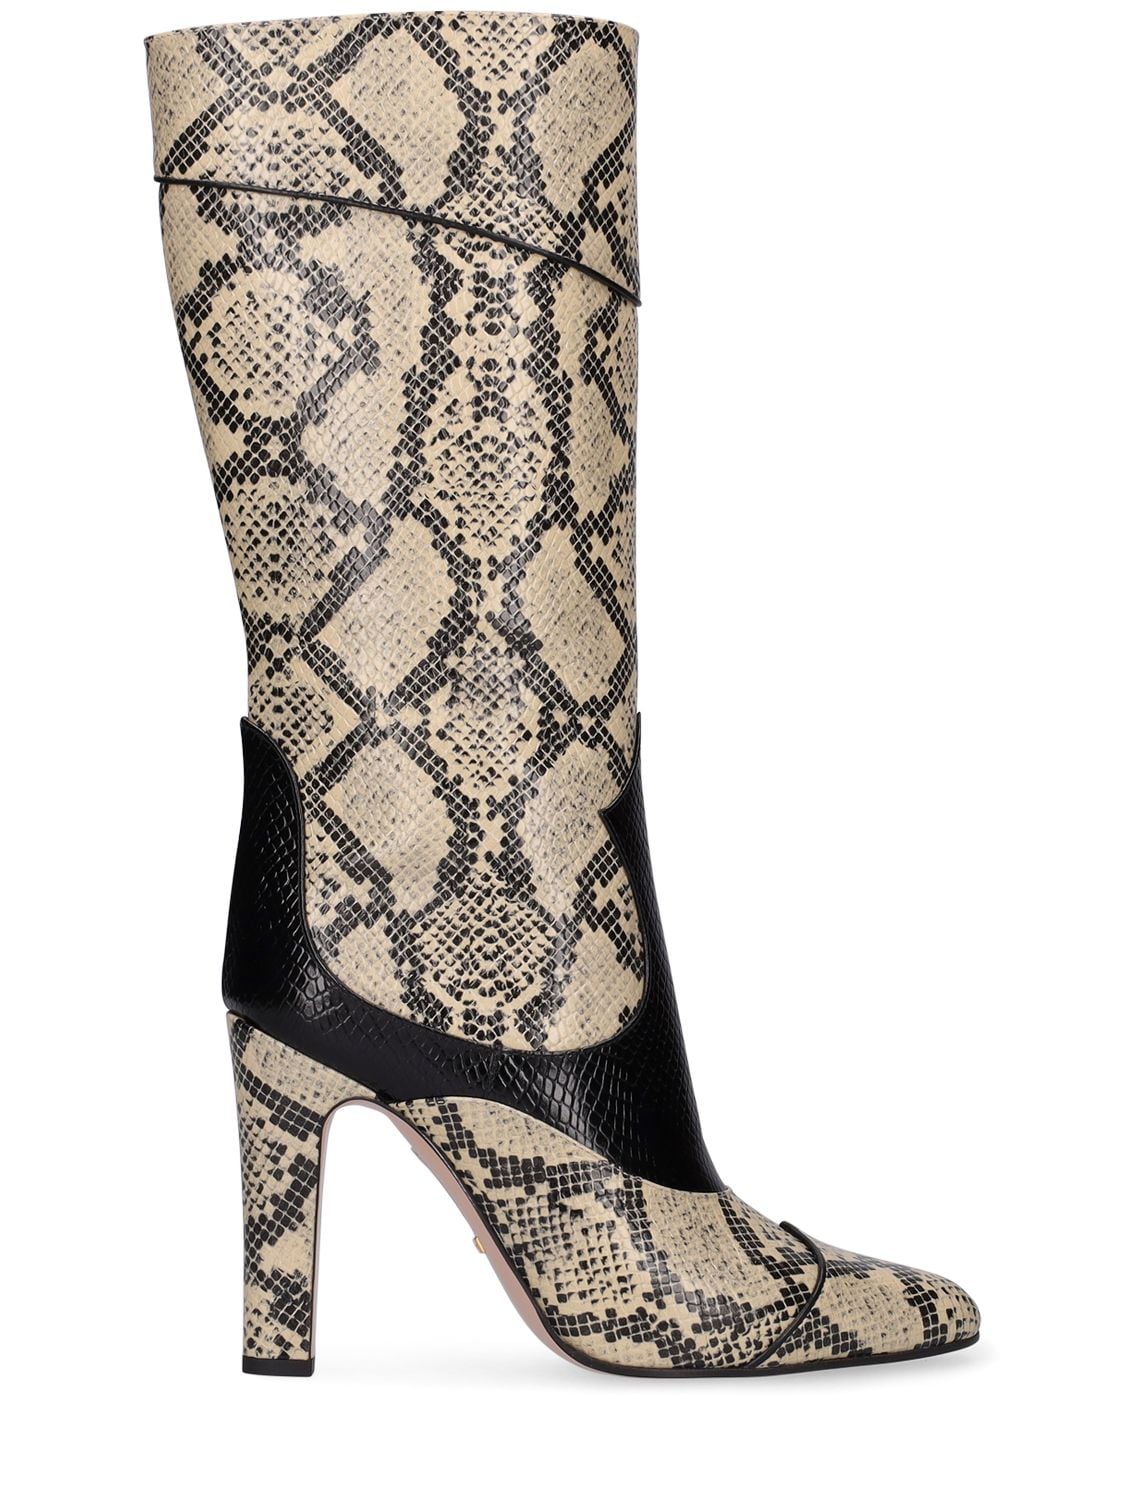 Gucci 105mm Cam Python Print Leather Boots In Beige | ModeSens